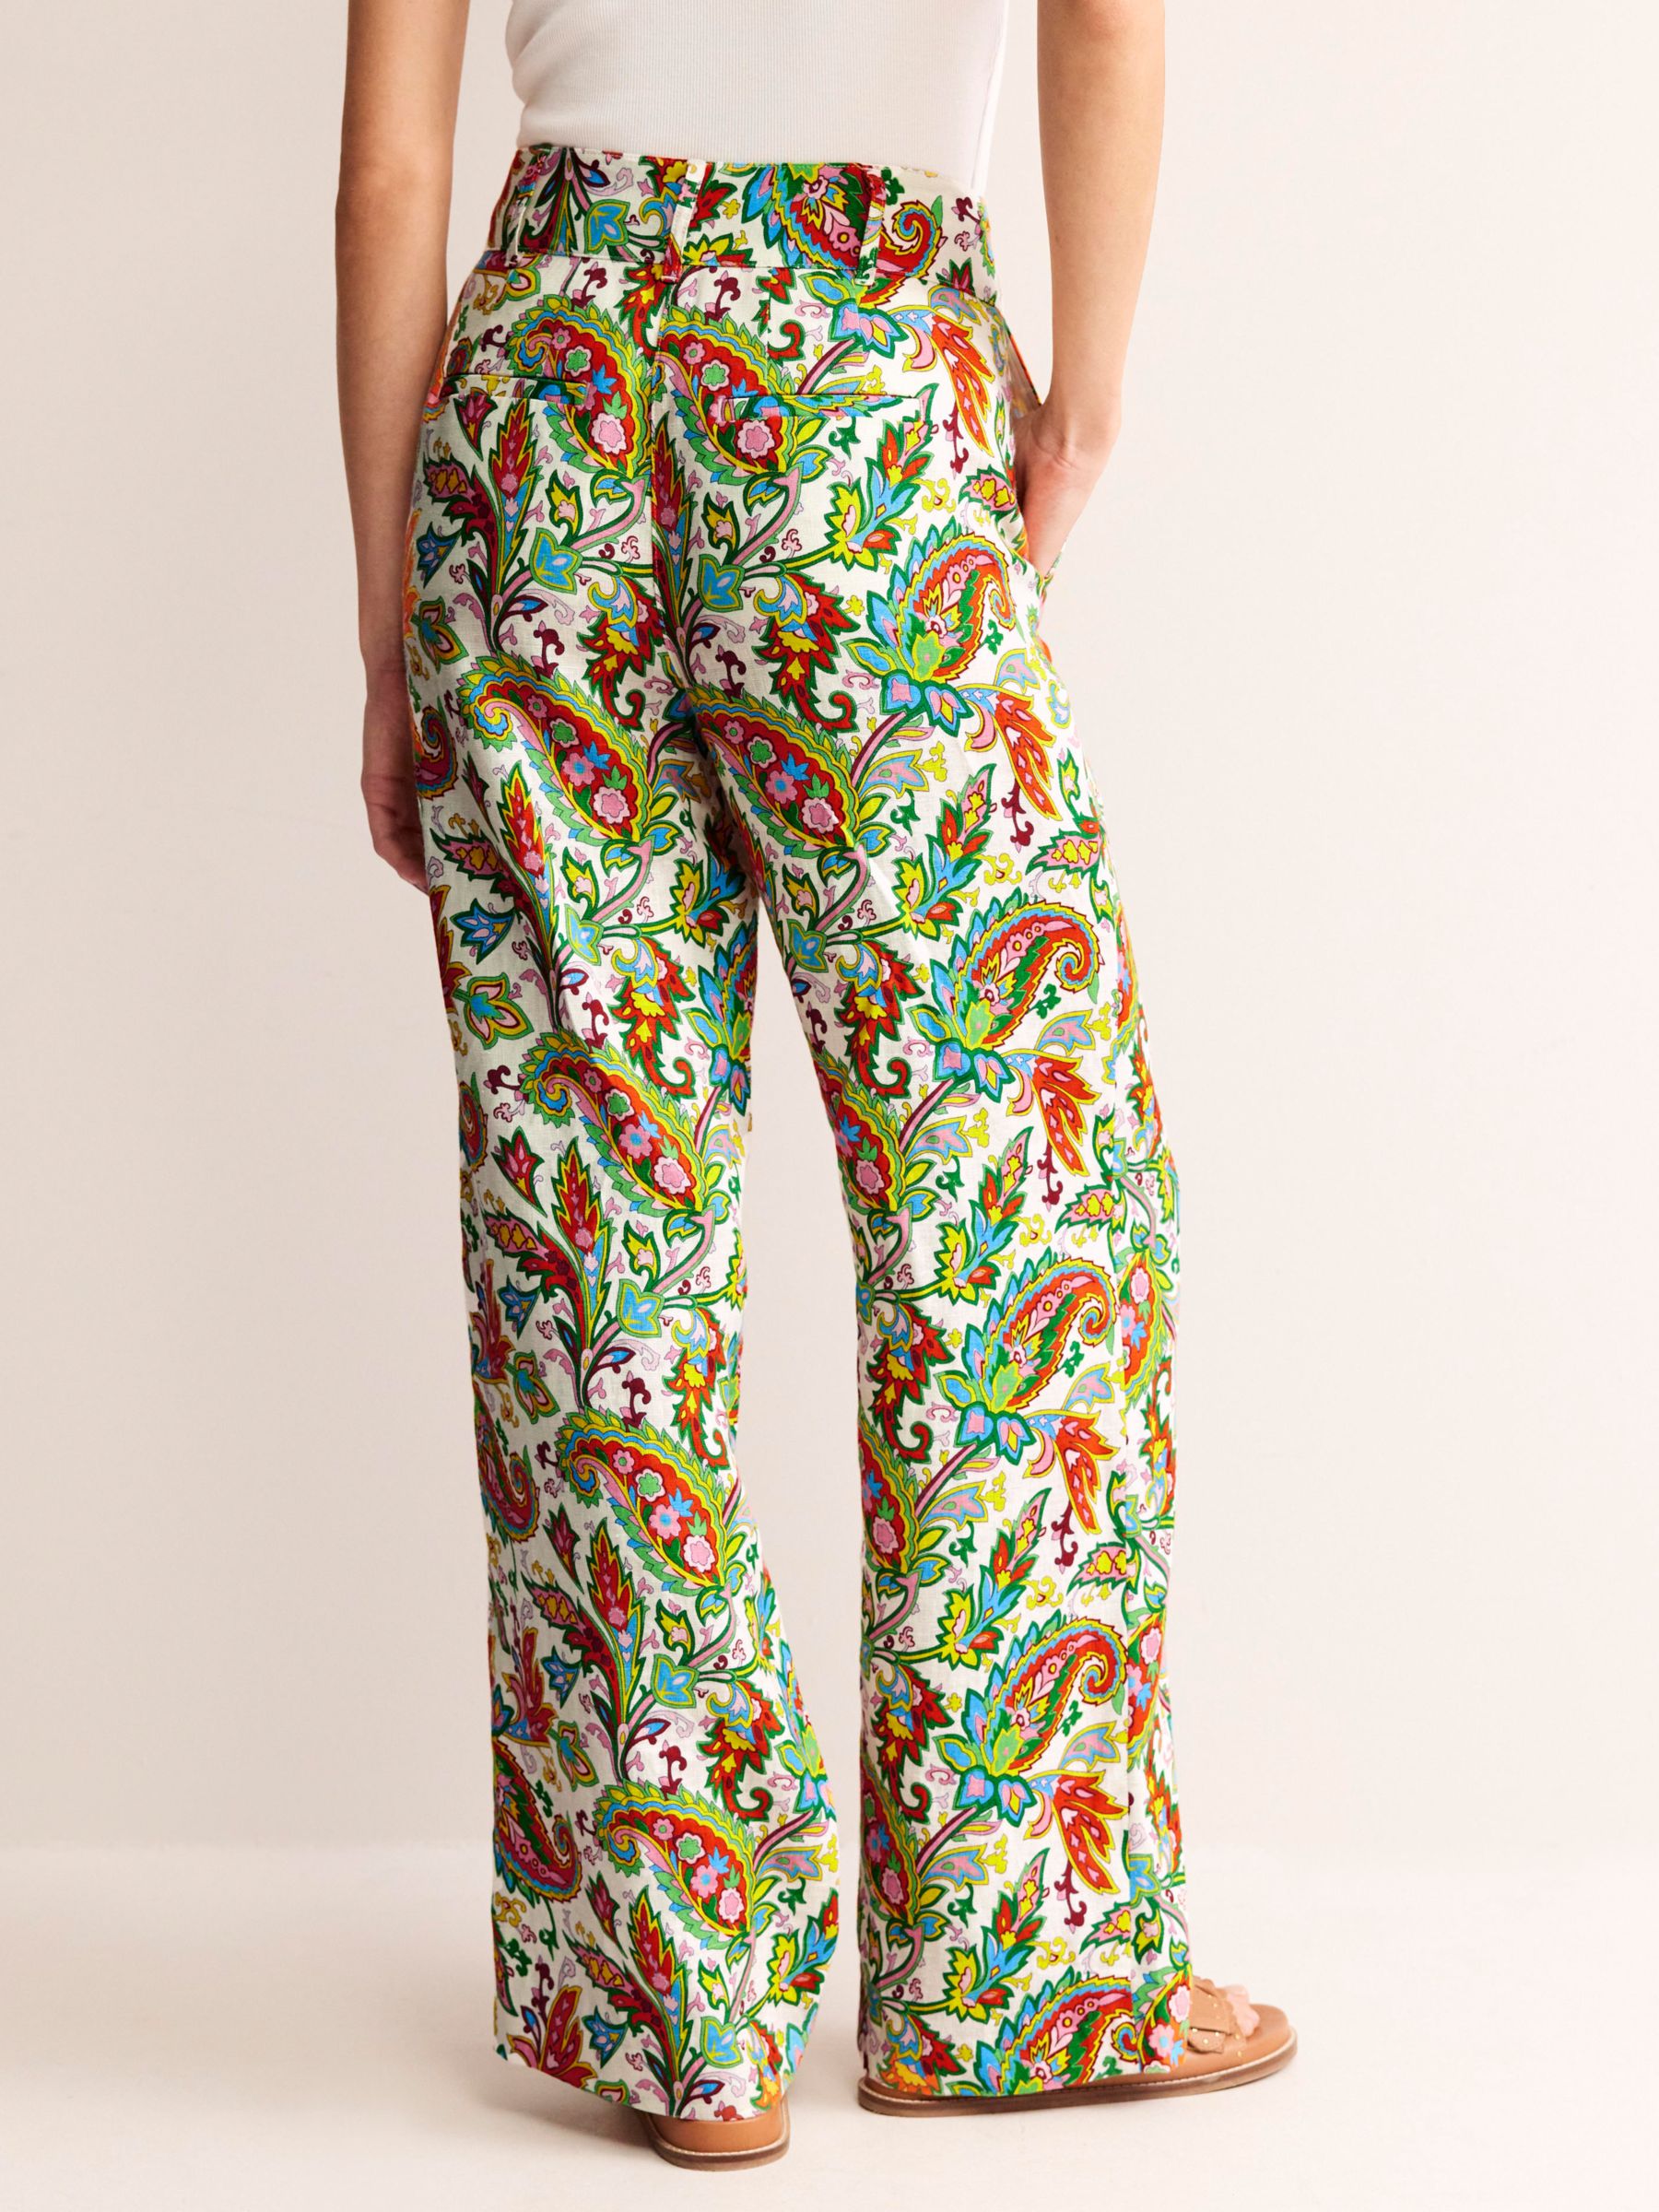 Buy Boden Westbourne Paisley Print Linen Trousers, Ivory/Multi Online at johnlewis.com